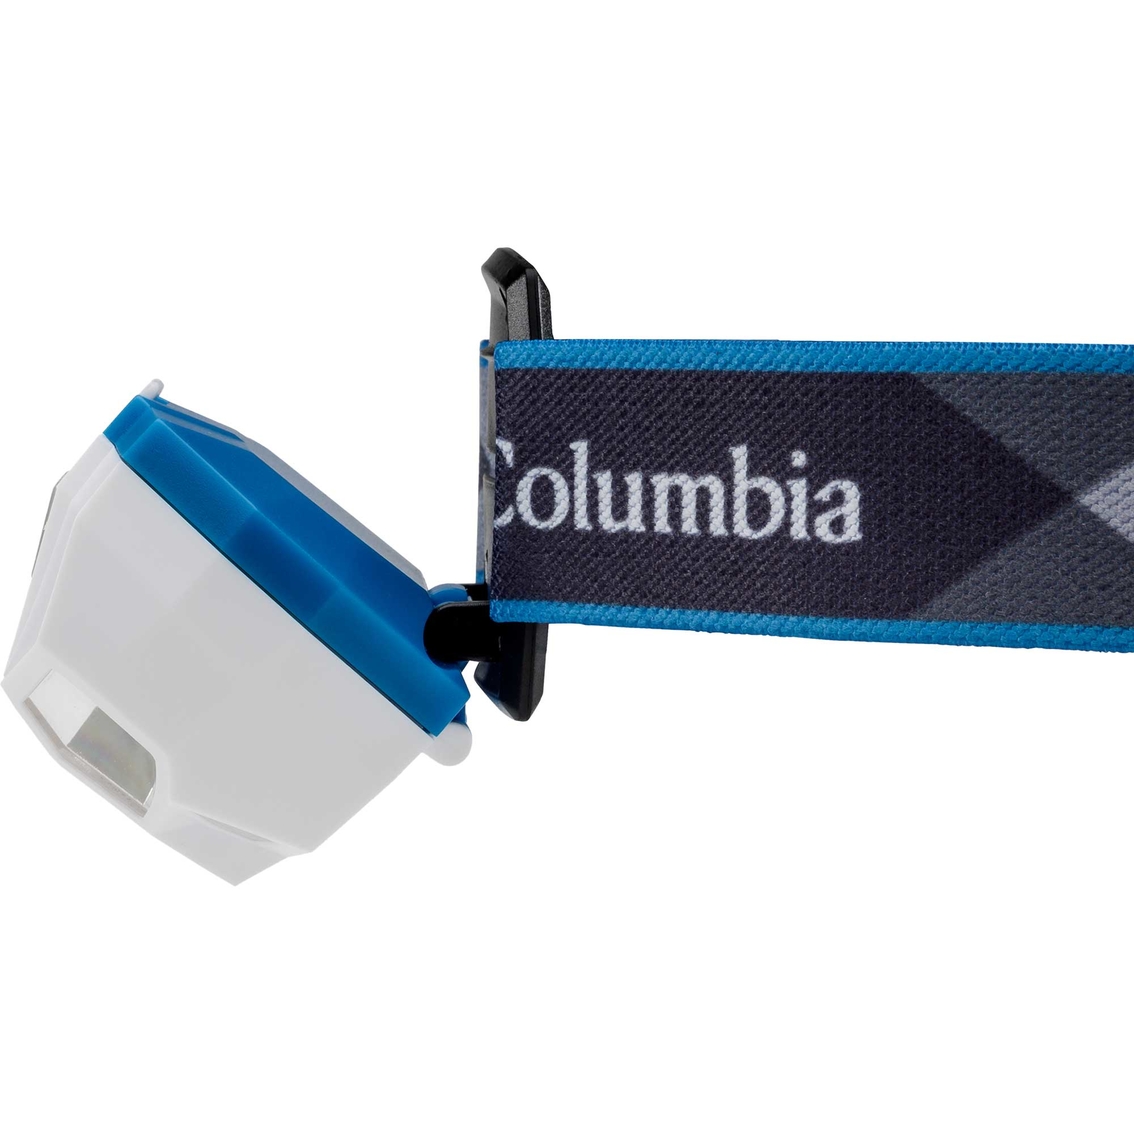 Columbia 300L Rechargeable Multi-Color Headlamp - Image 8 of 8